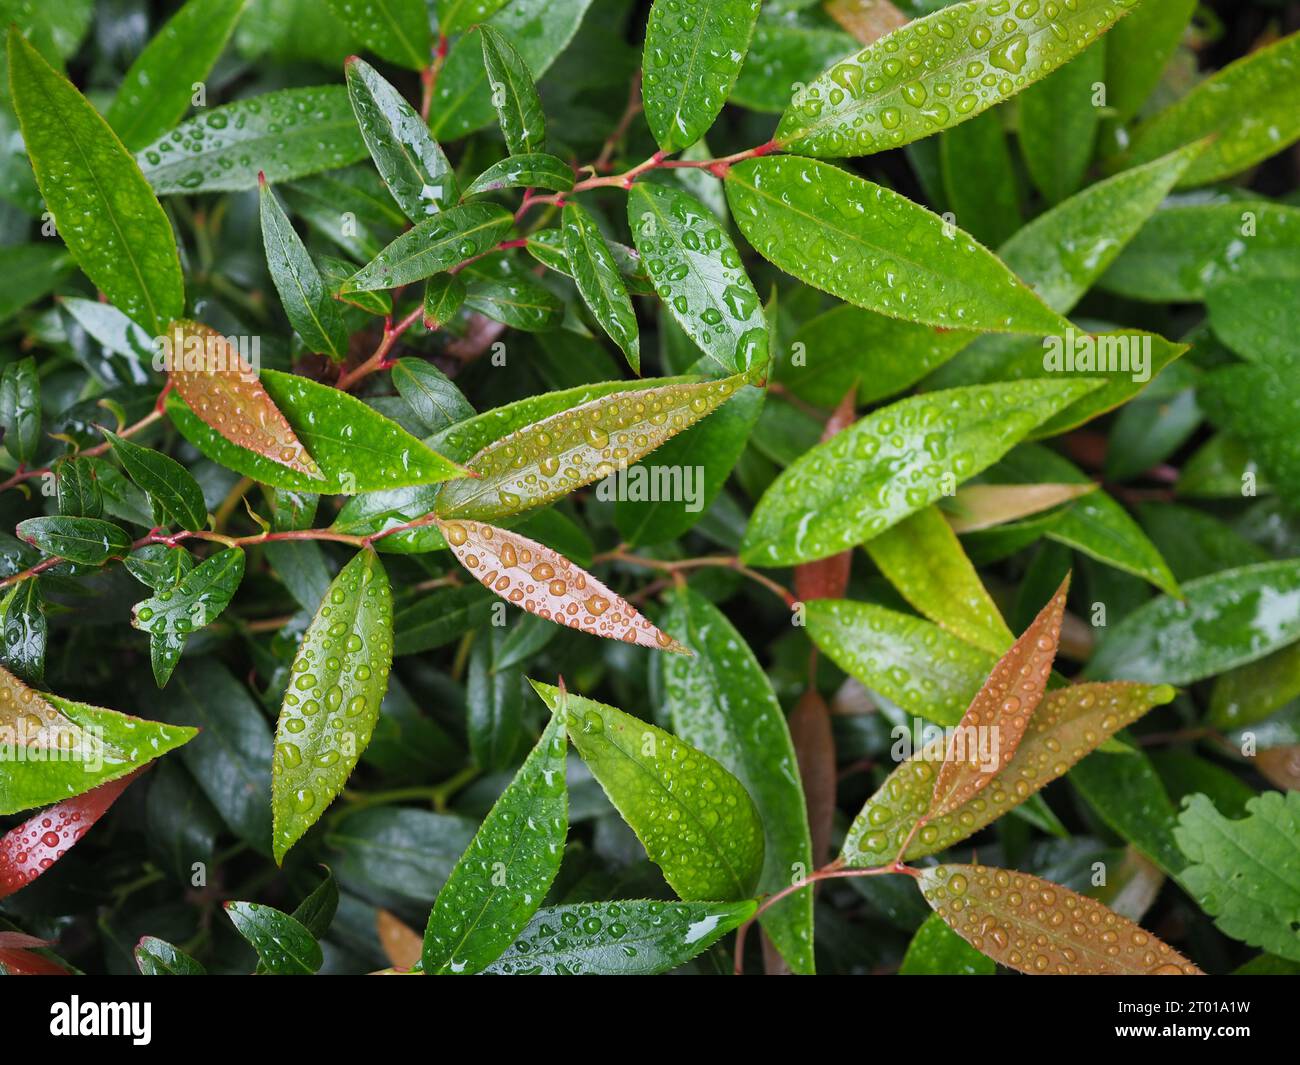 Close up of the rain wet leaves of the Leucothoe keiskei 'Burning Love' evergreen plant, showing the foliage in red and green shades Stock Photo